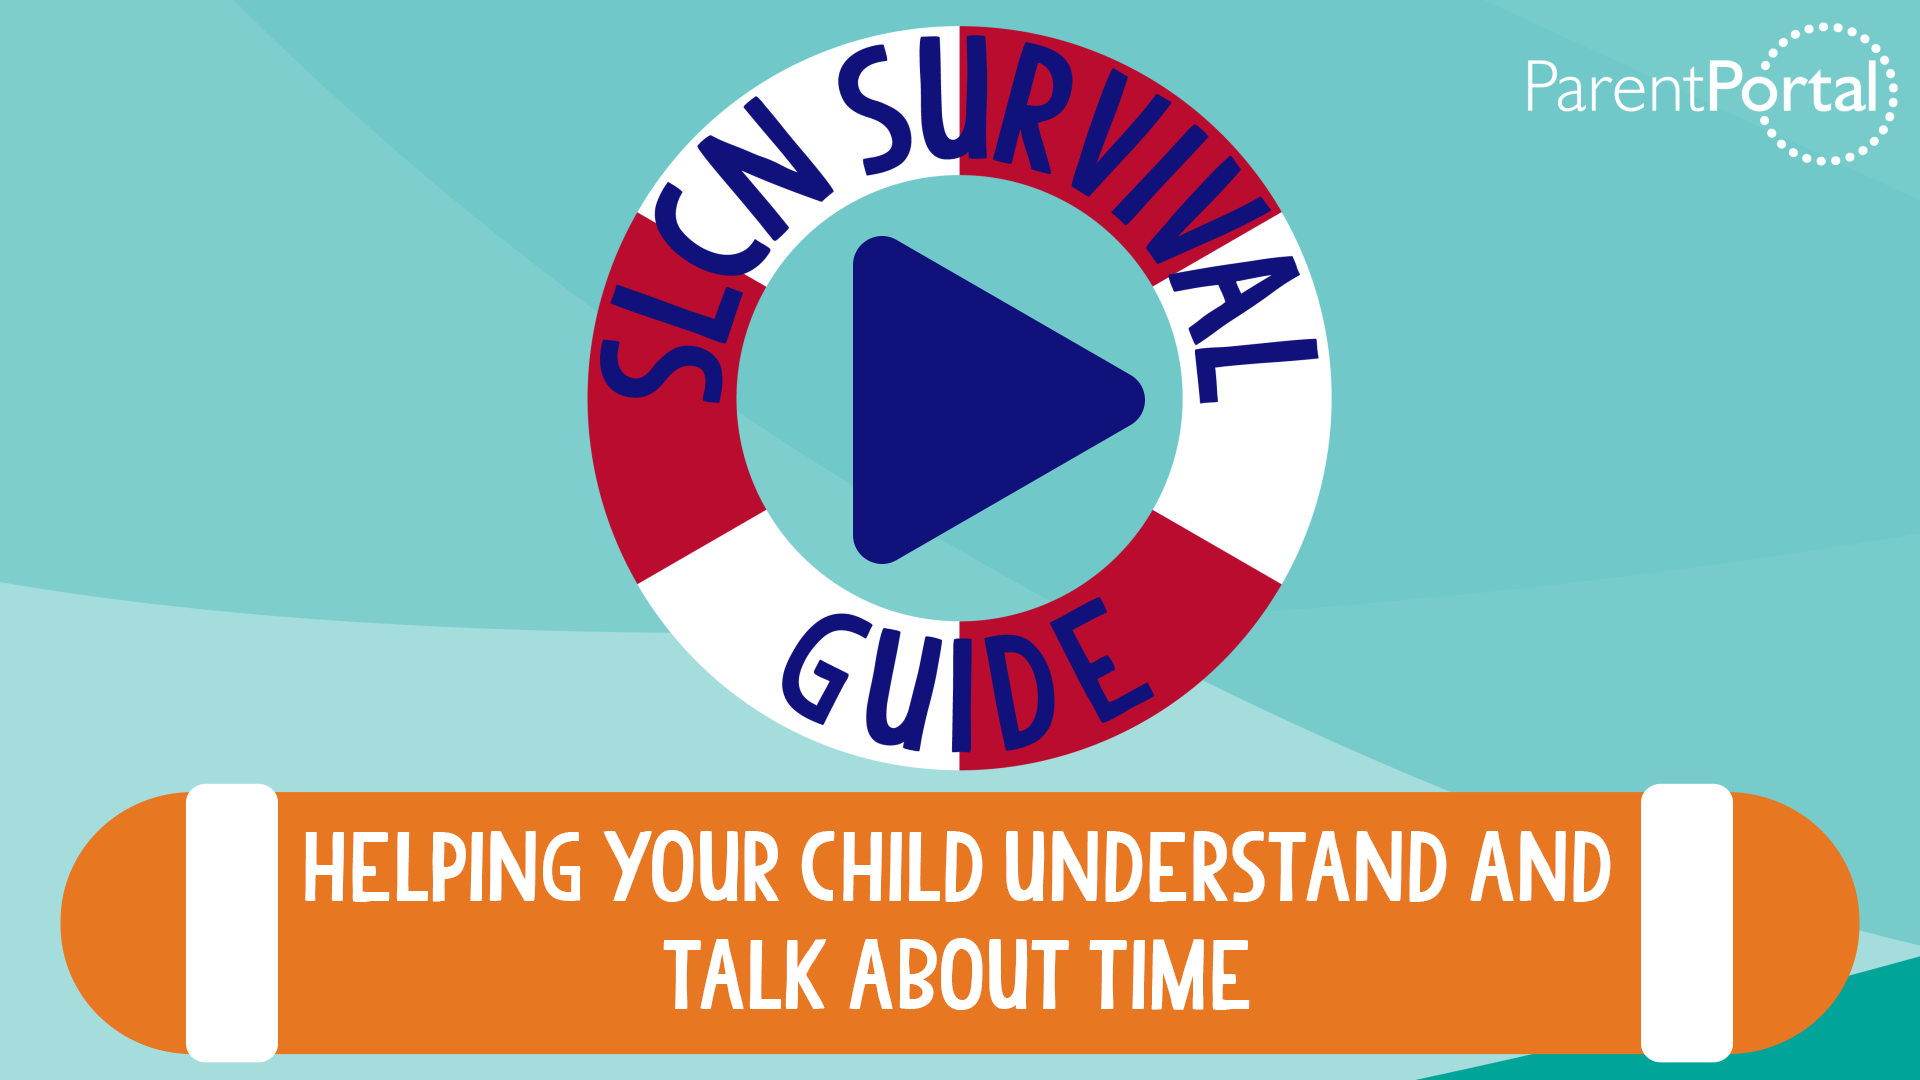 SLCN Survival Guide 6 - Helping your Child Understand and Talk About Time